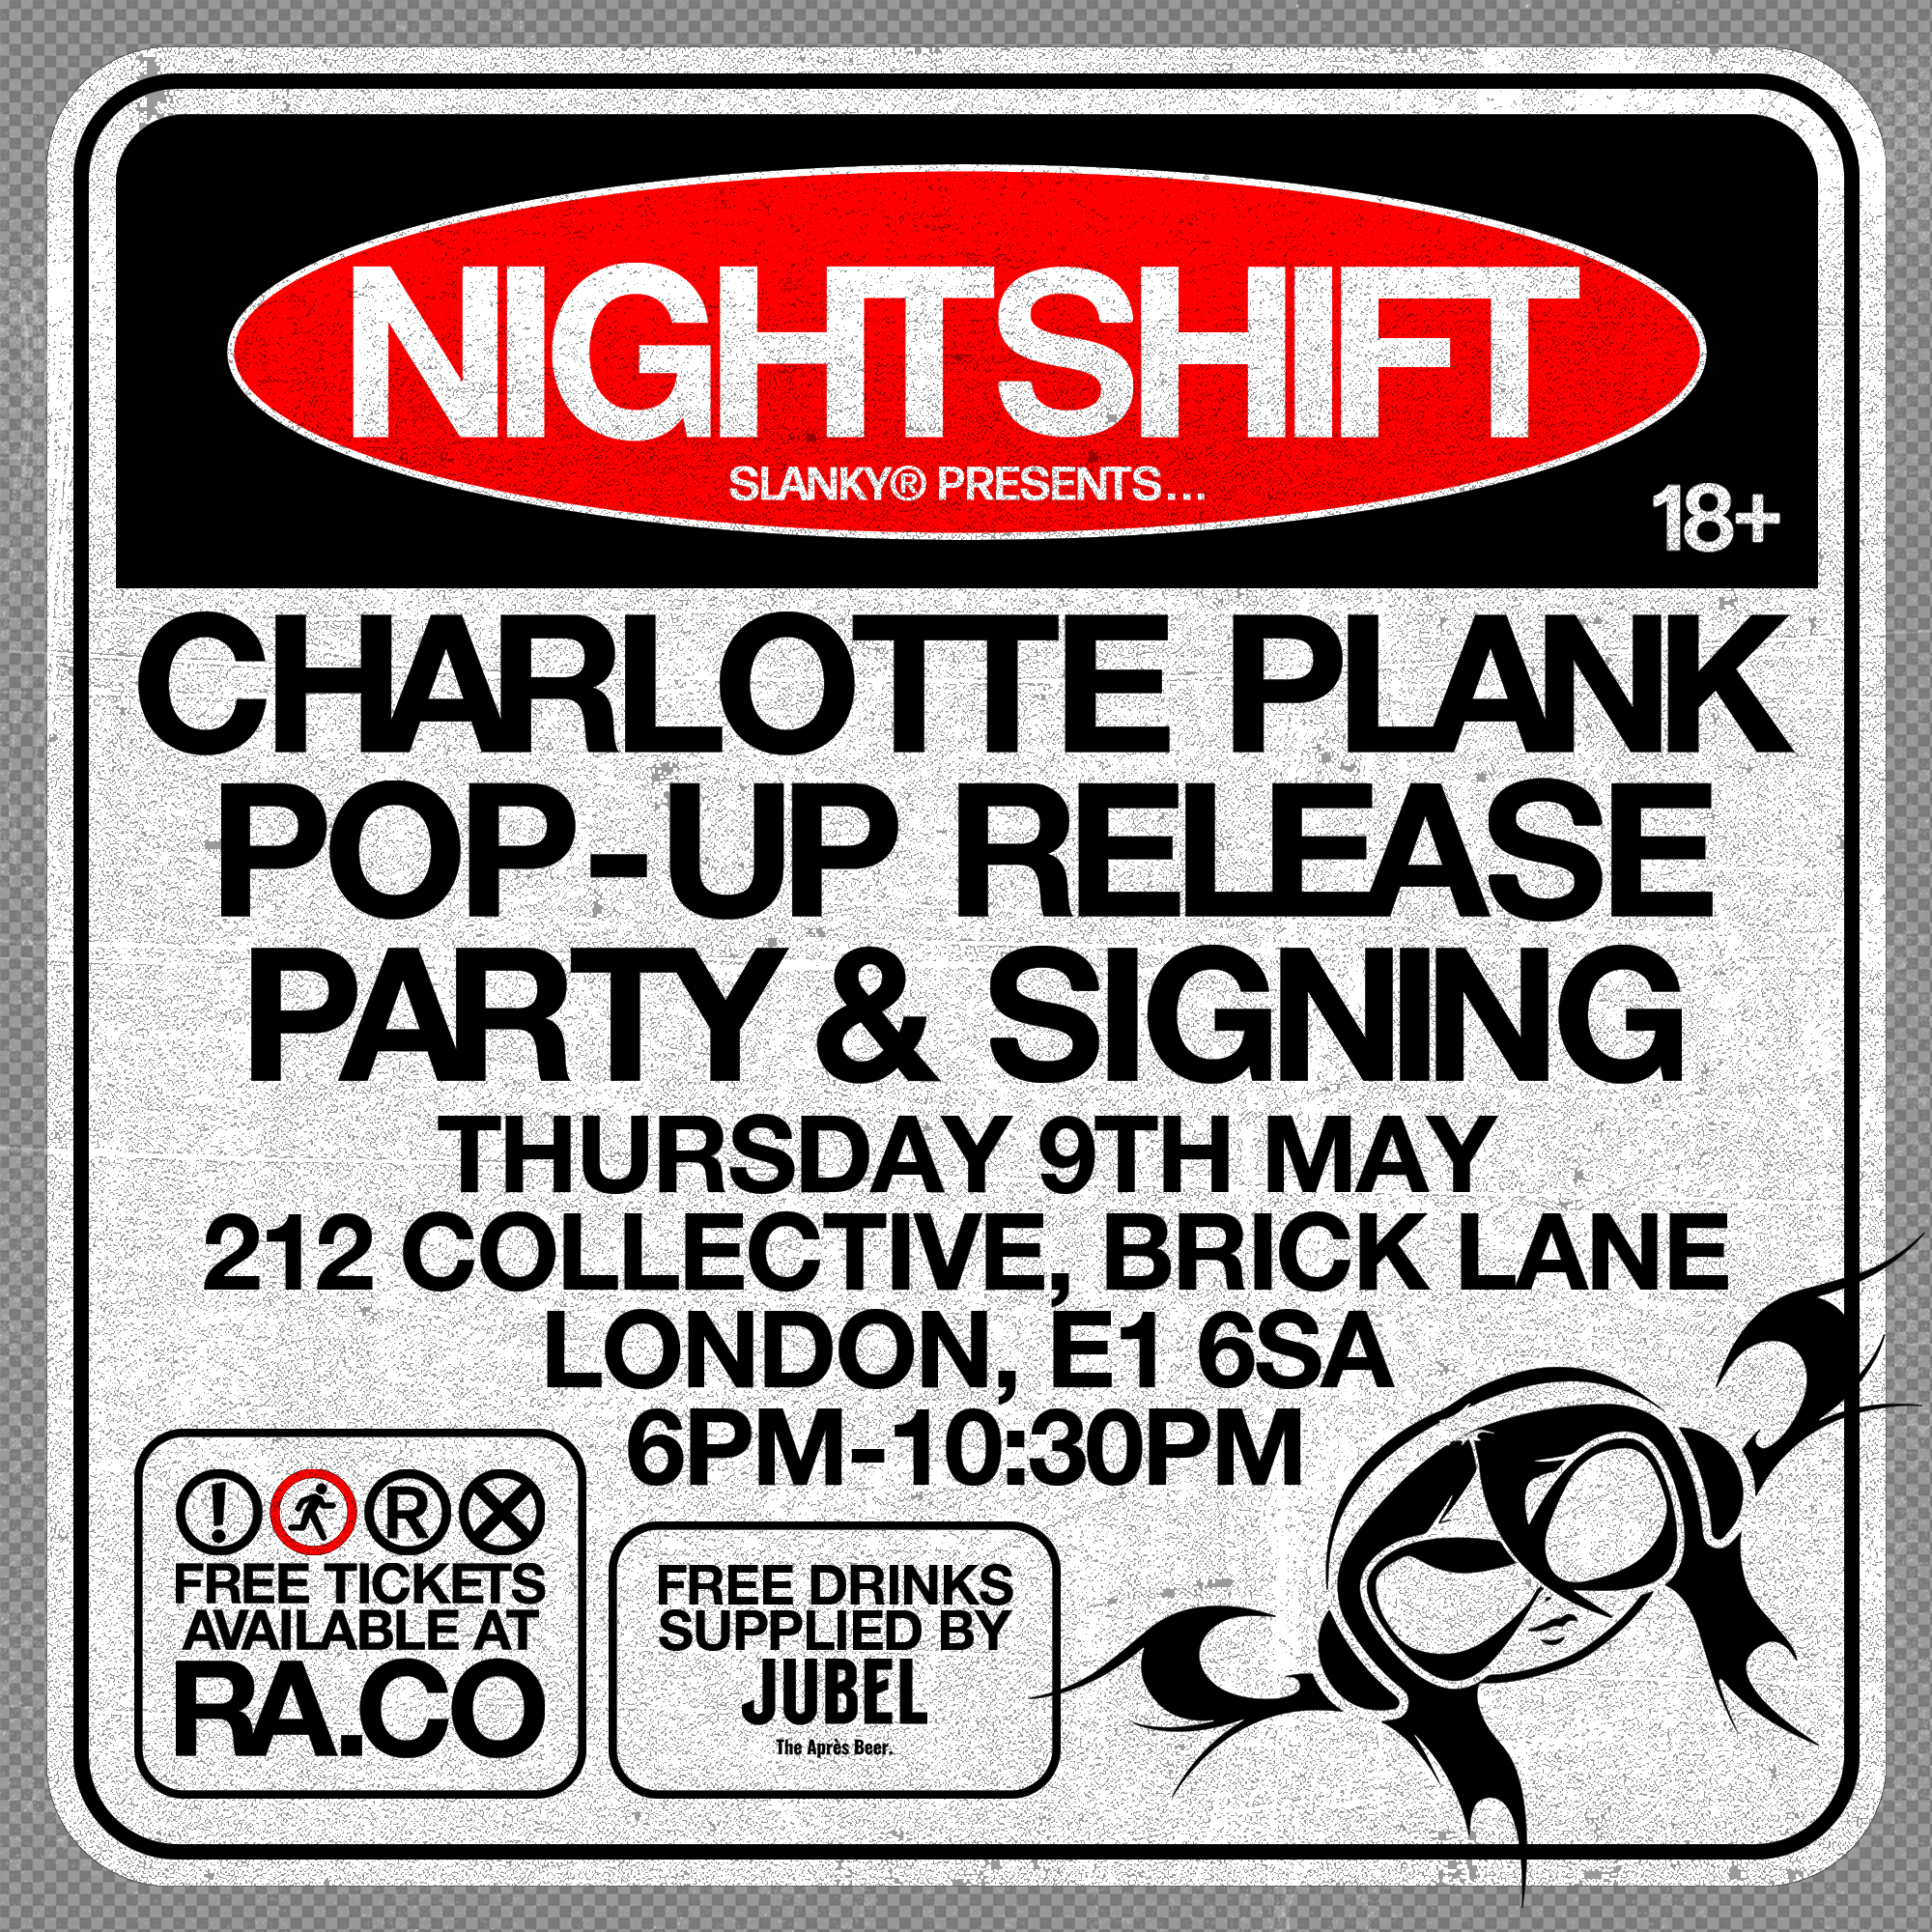 Charlotte Plank Pop-Up Release Party & Signing - フライヤー表